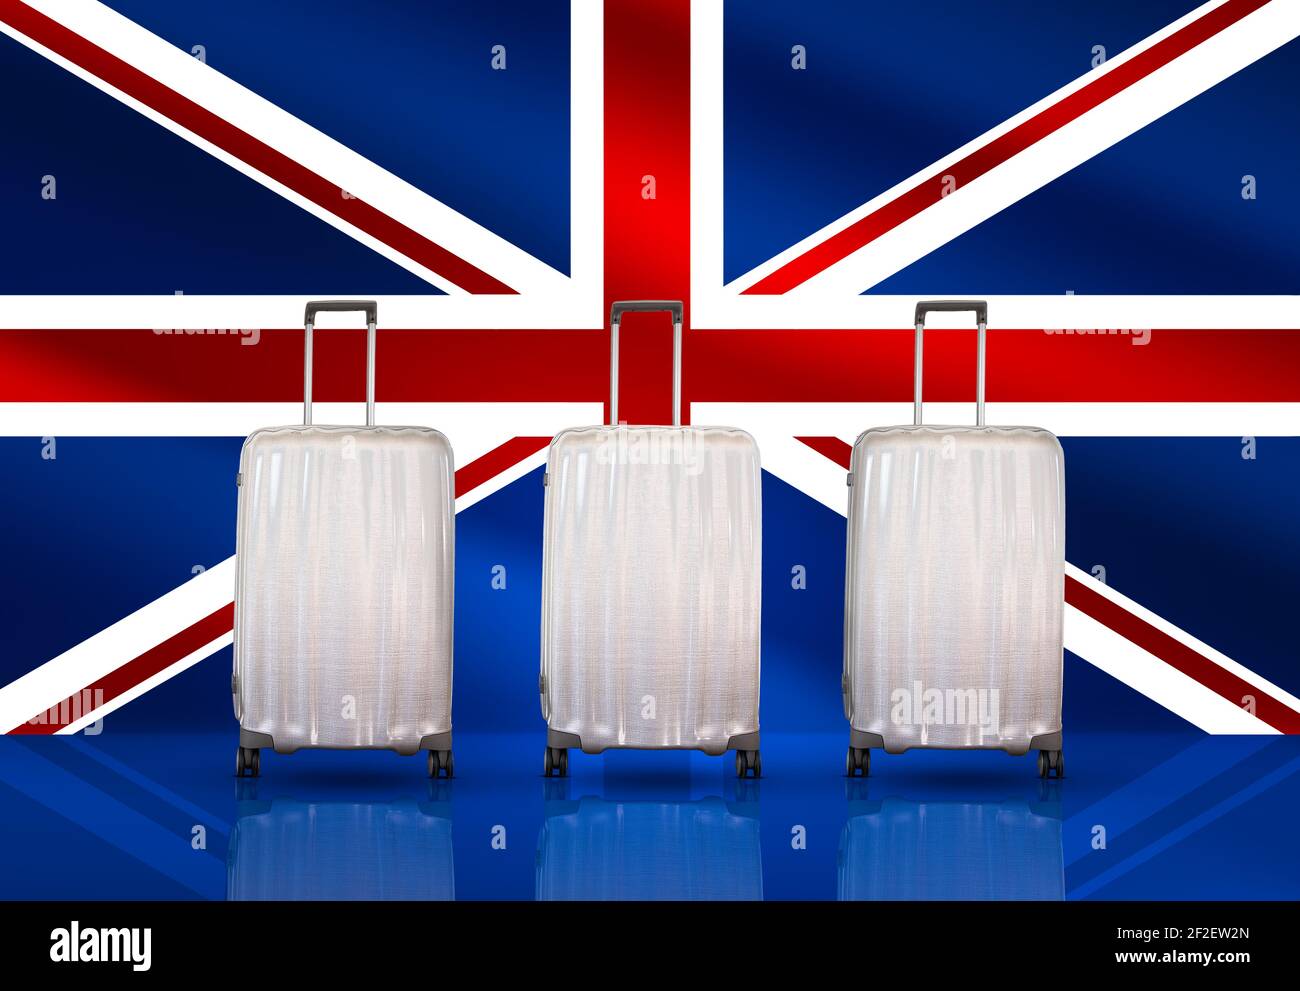 Travel suitcases in front of United Kingdom flag. British holiday and tourism concept. Stock Photo